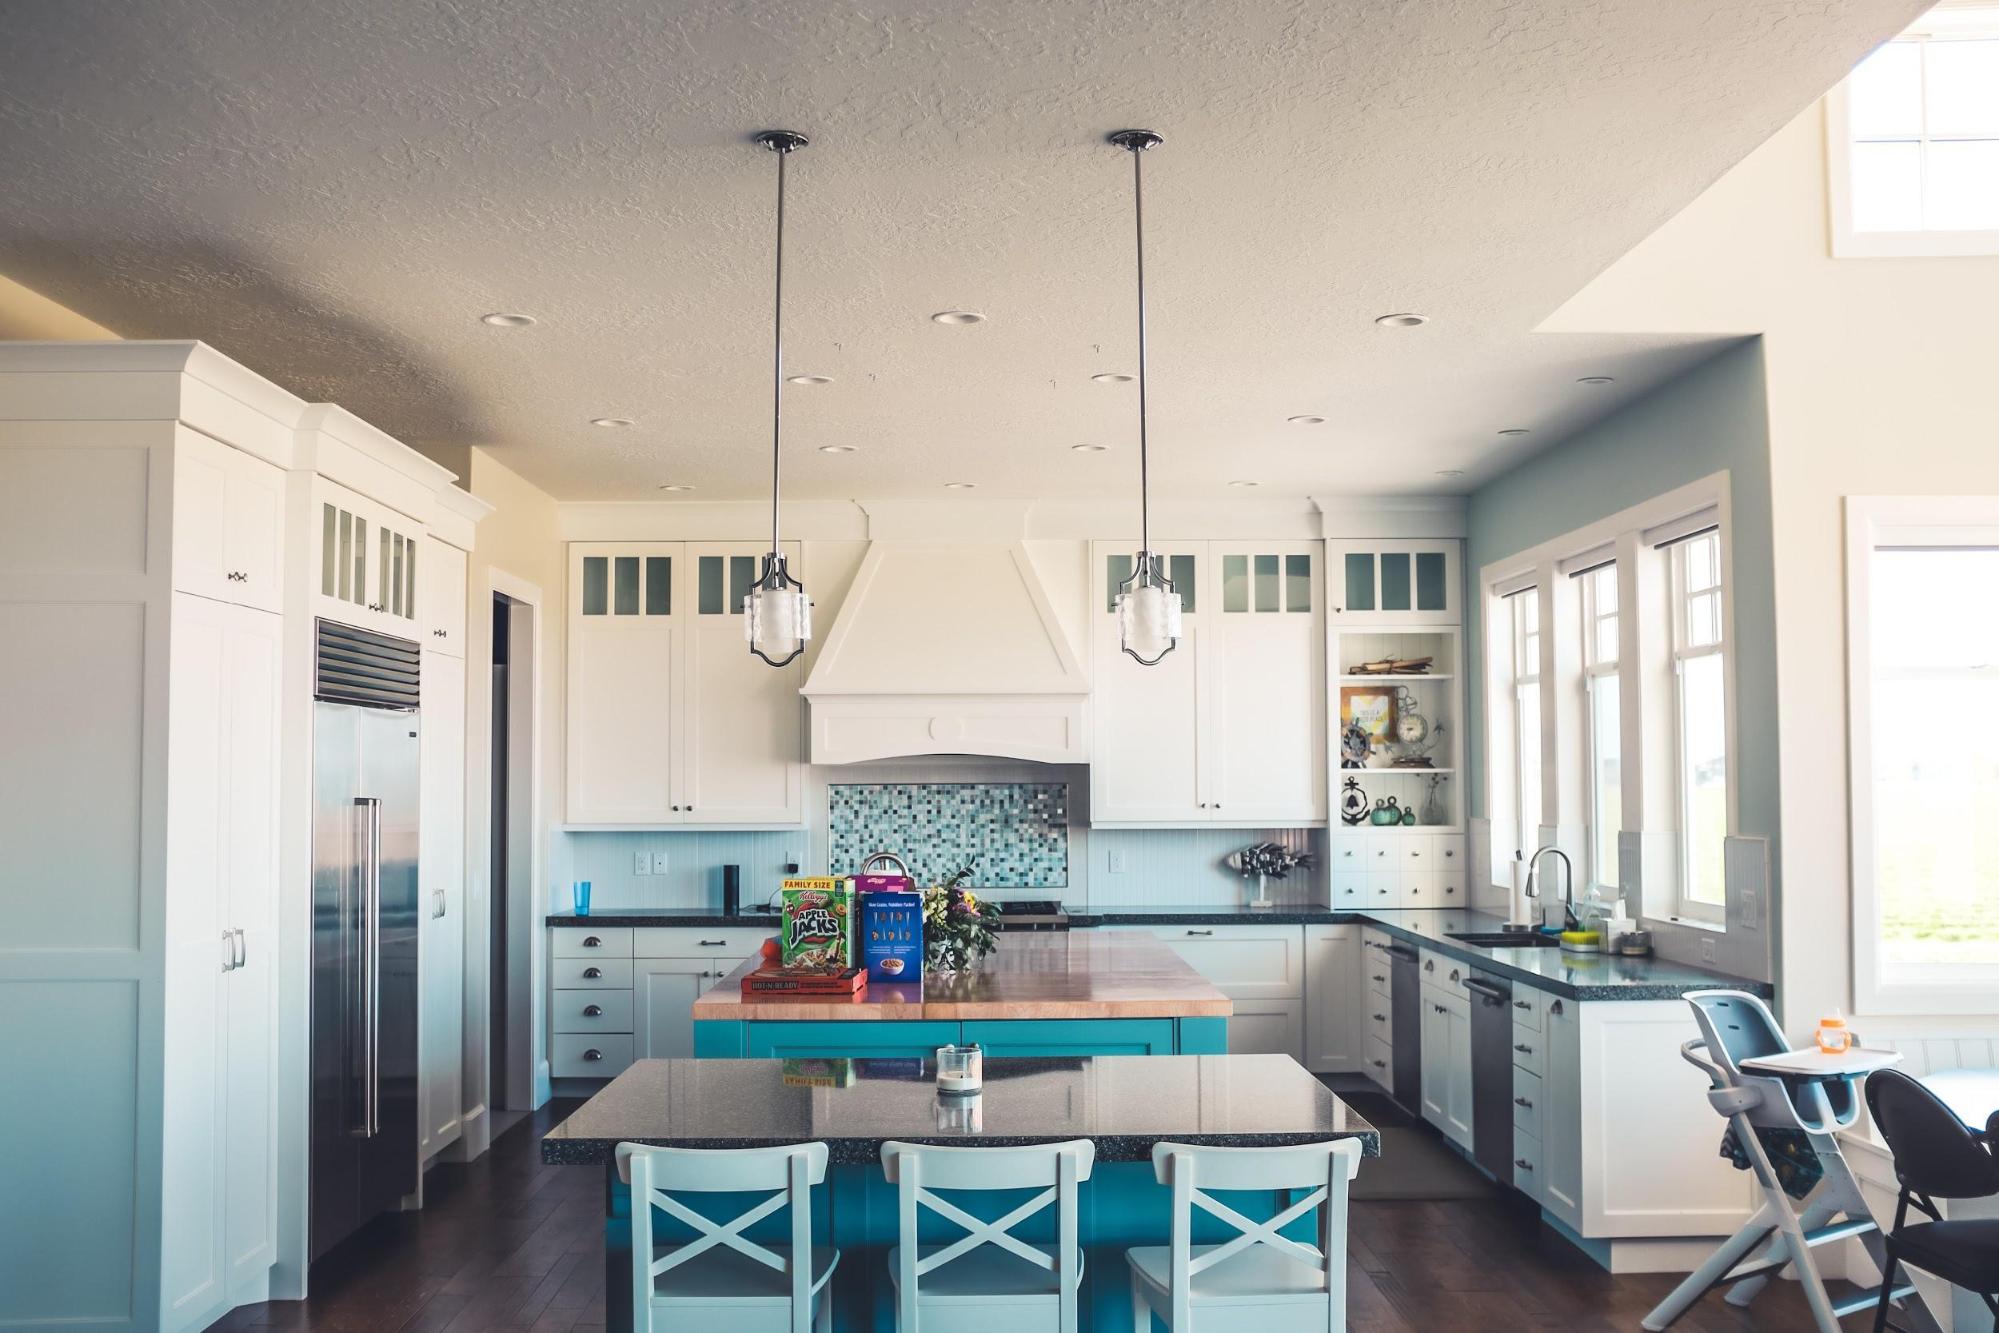 A kitchen designer creates a kitchen with white cabinets and blue counter tops.